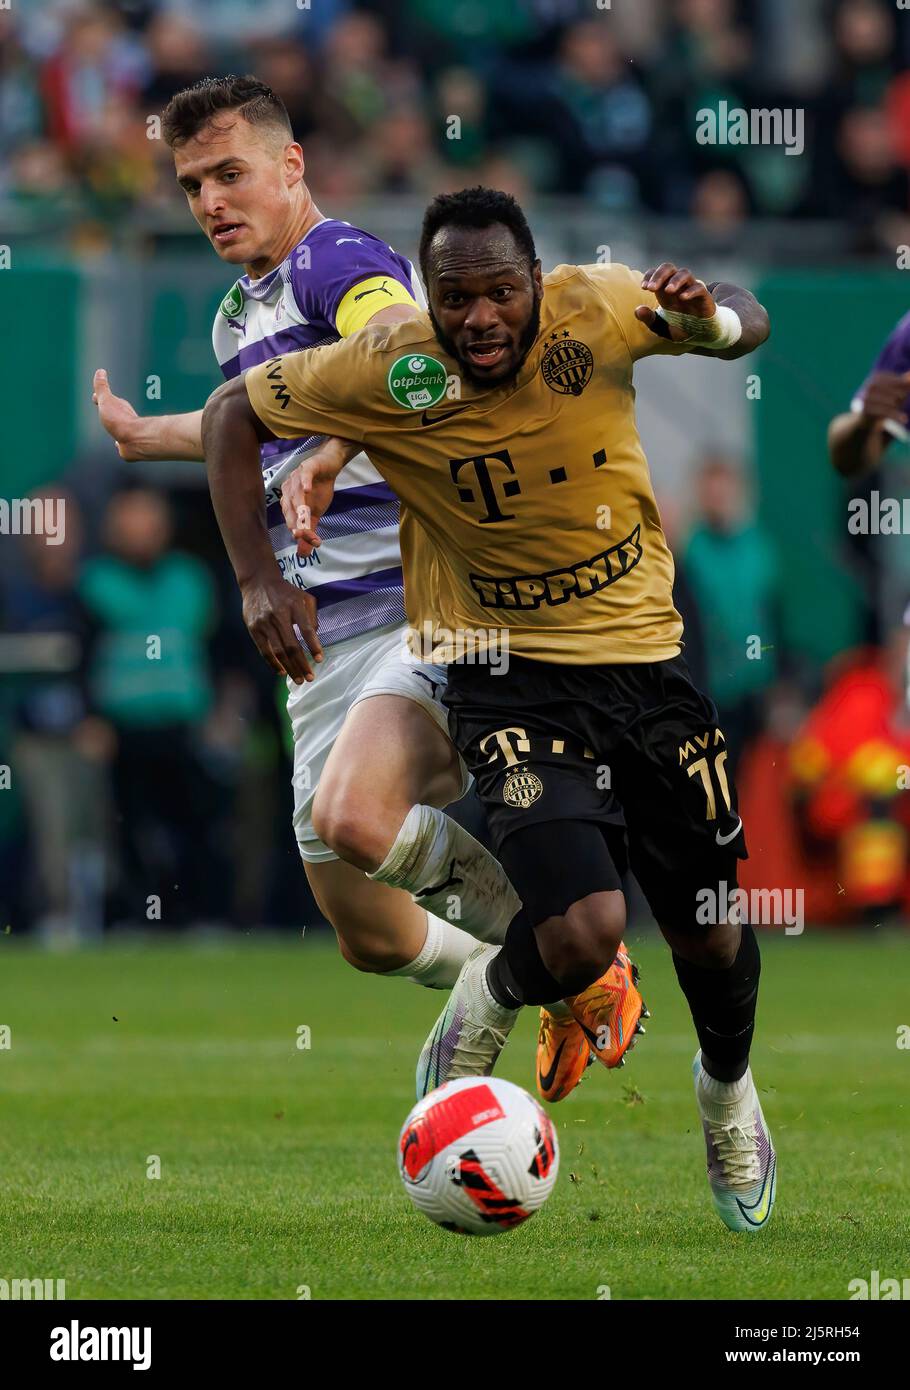 BUDAPEST, HUNGARY - APRIL 24: Yohan Croizet of Ujpest FC fights for the  ball with Adnan Kovacevic of Ferencvarosi TC during the Hungarian OTP Bank  Liga match between Ferencvarosi TC and Ujpest